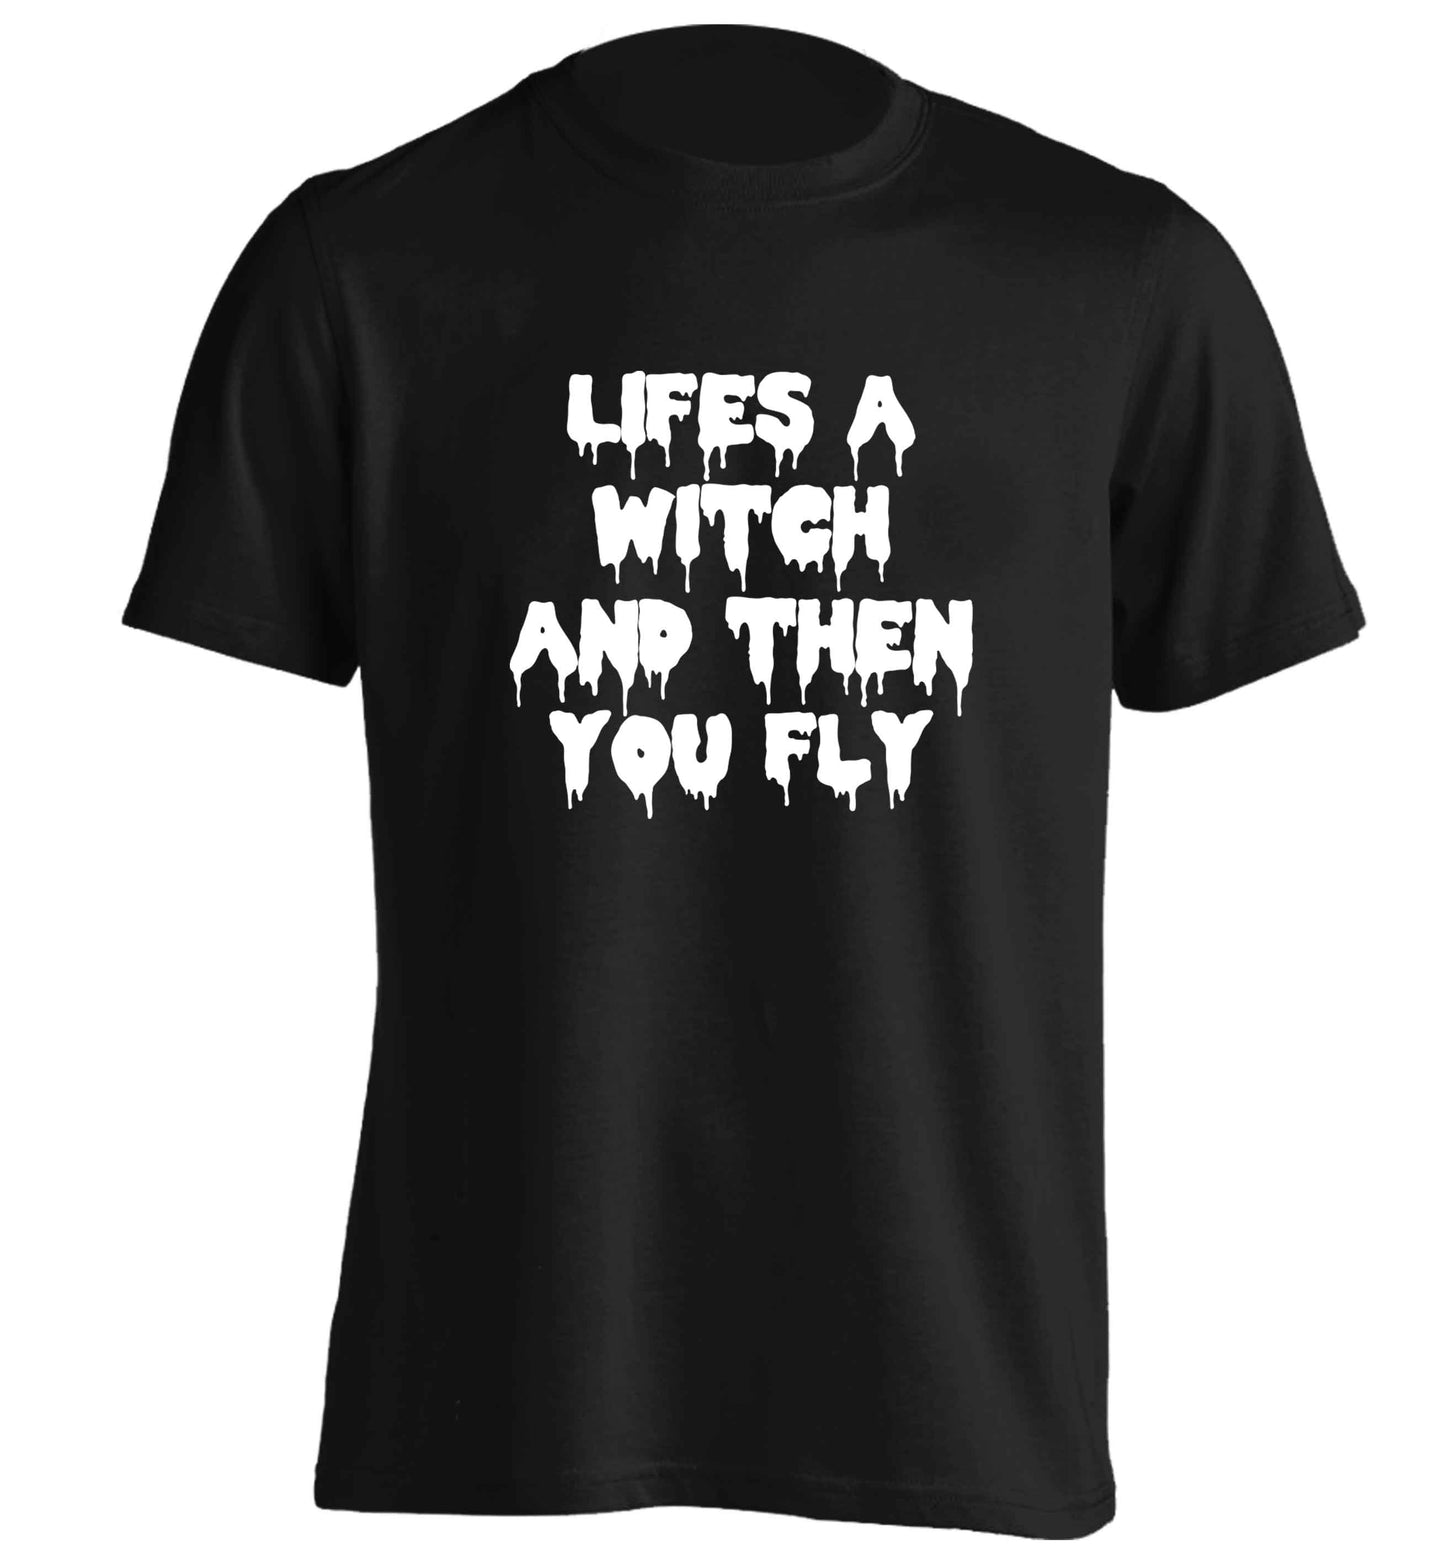 Life's a witch and then you fly adults unisex black Tshirt 2XL